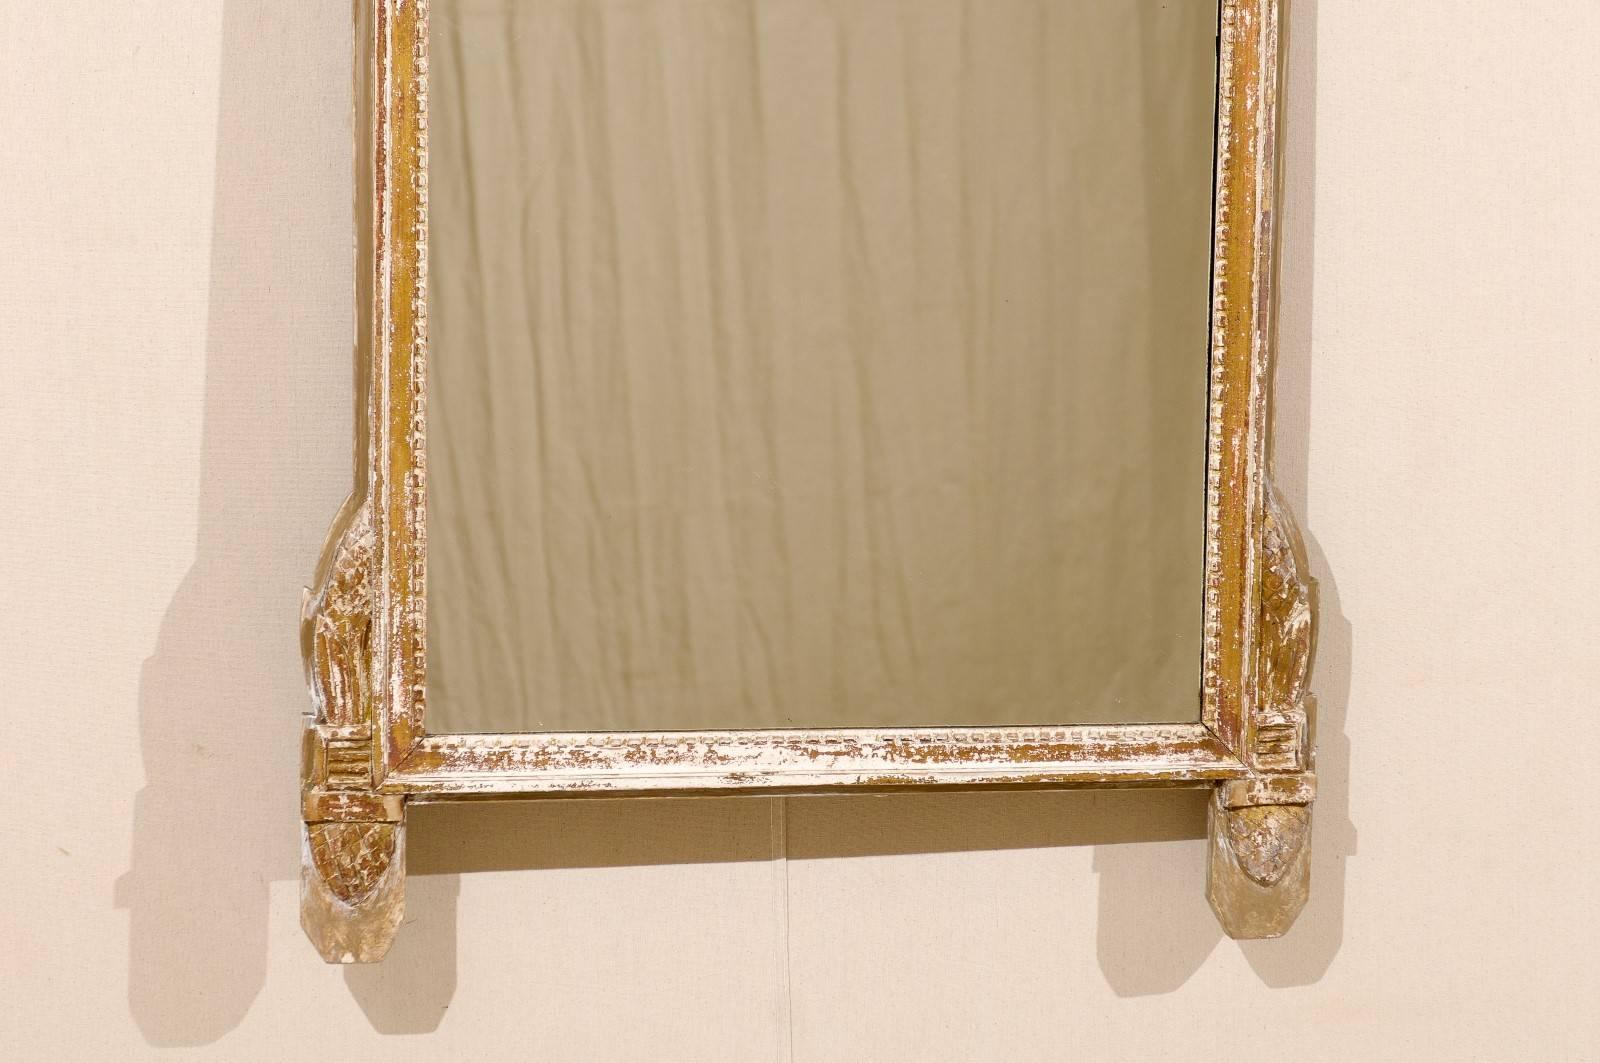 19th Century French Gilded and Ornately Carved Wood Mirror with Urn Motif Crest, Gold Color